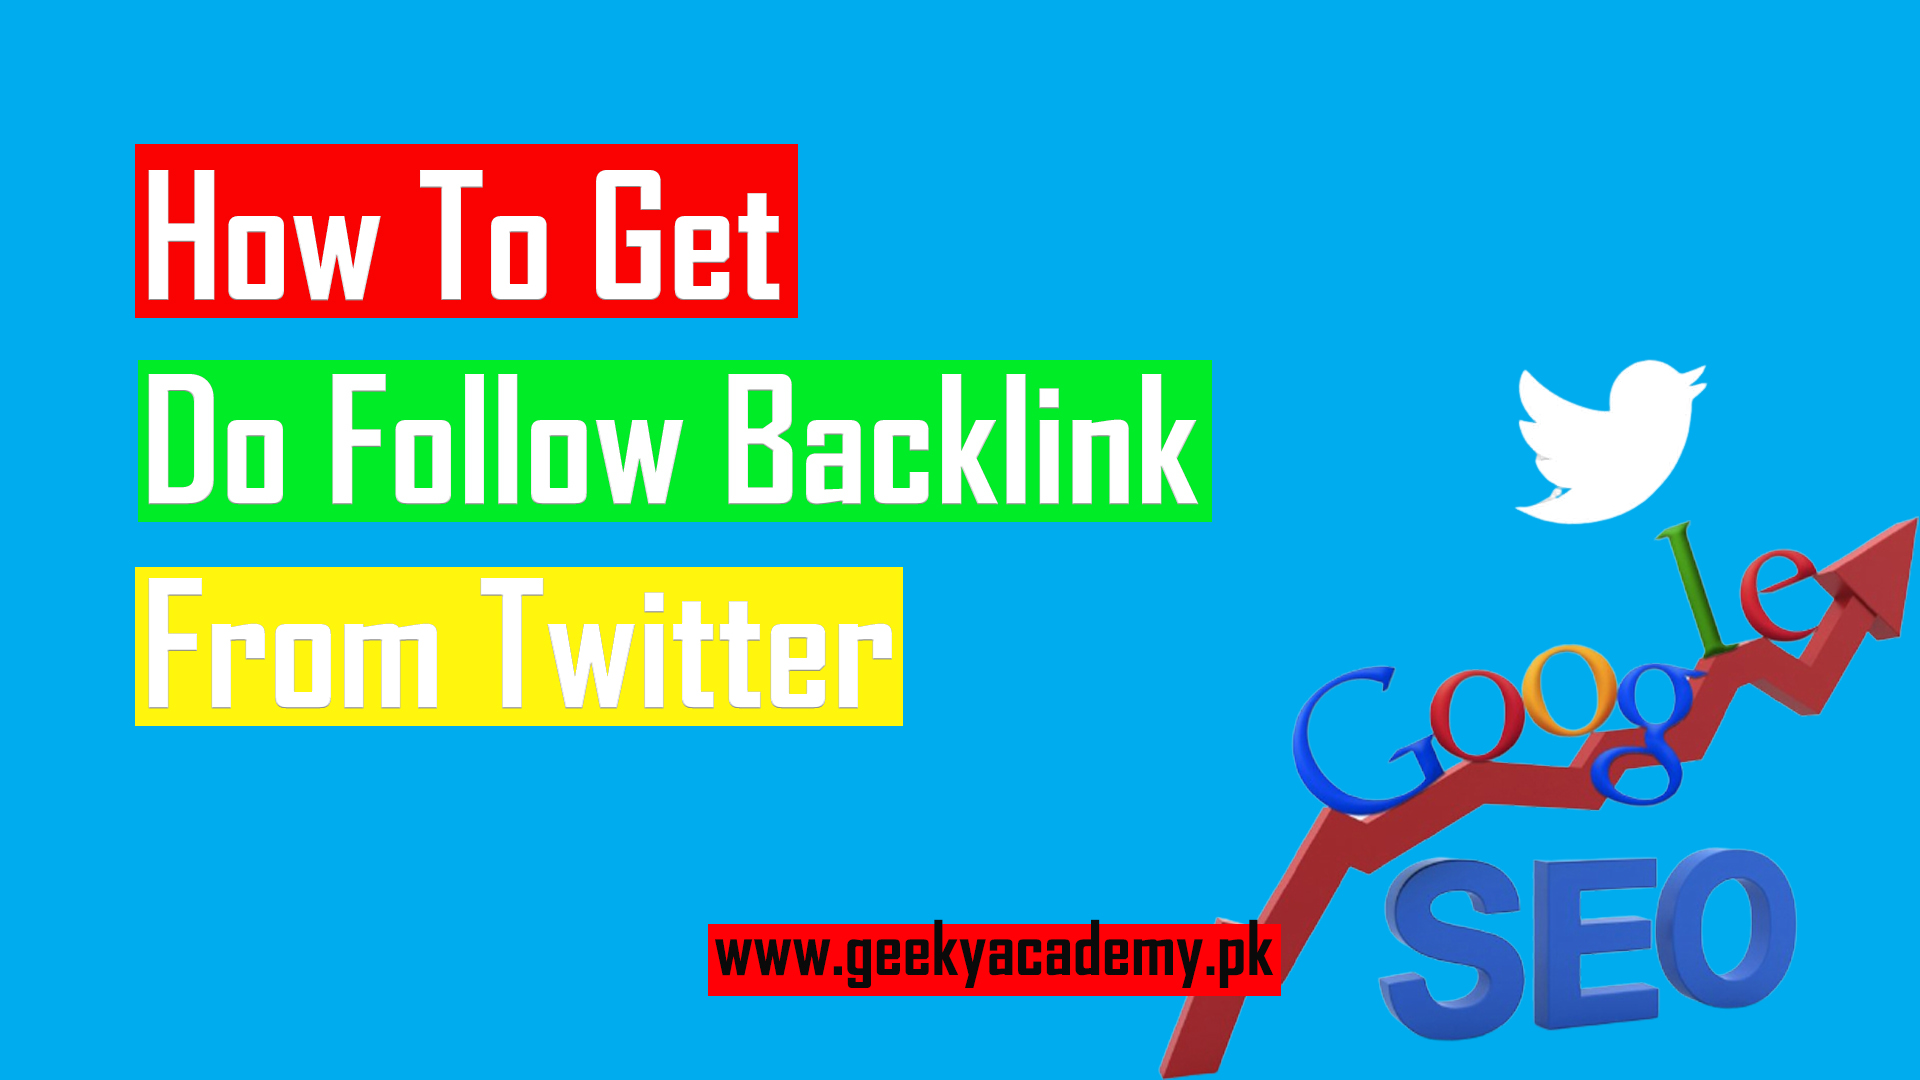 How To Get Do Follow Backlink From Twitter